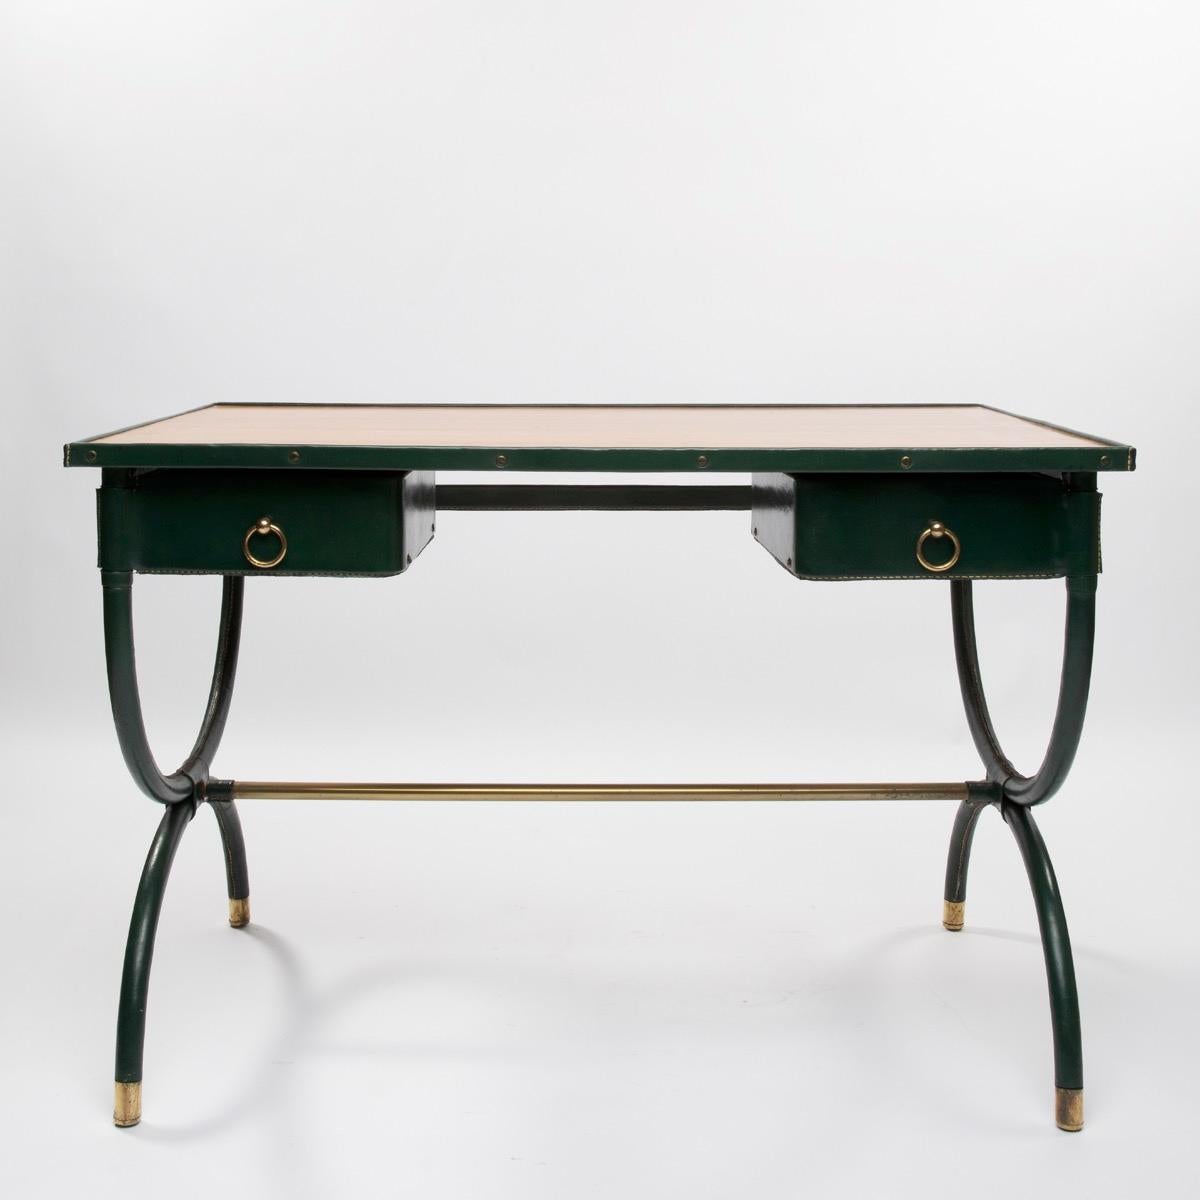 Elegant desk, with metal structure sheathed of green saddle stitching leather, pivoting drawers, with his armchair and waste paper basket. The steel bronze structure of this 4 leg-chair is made of 